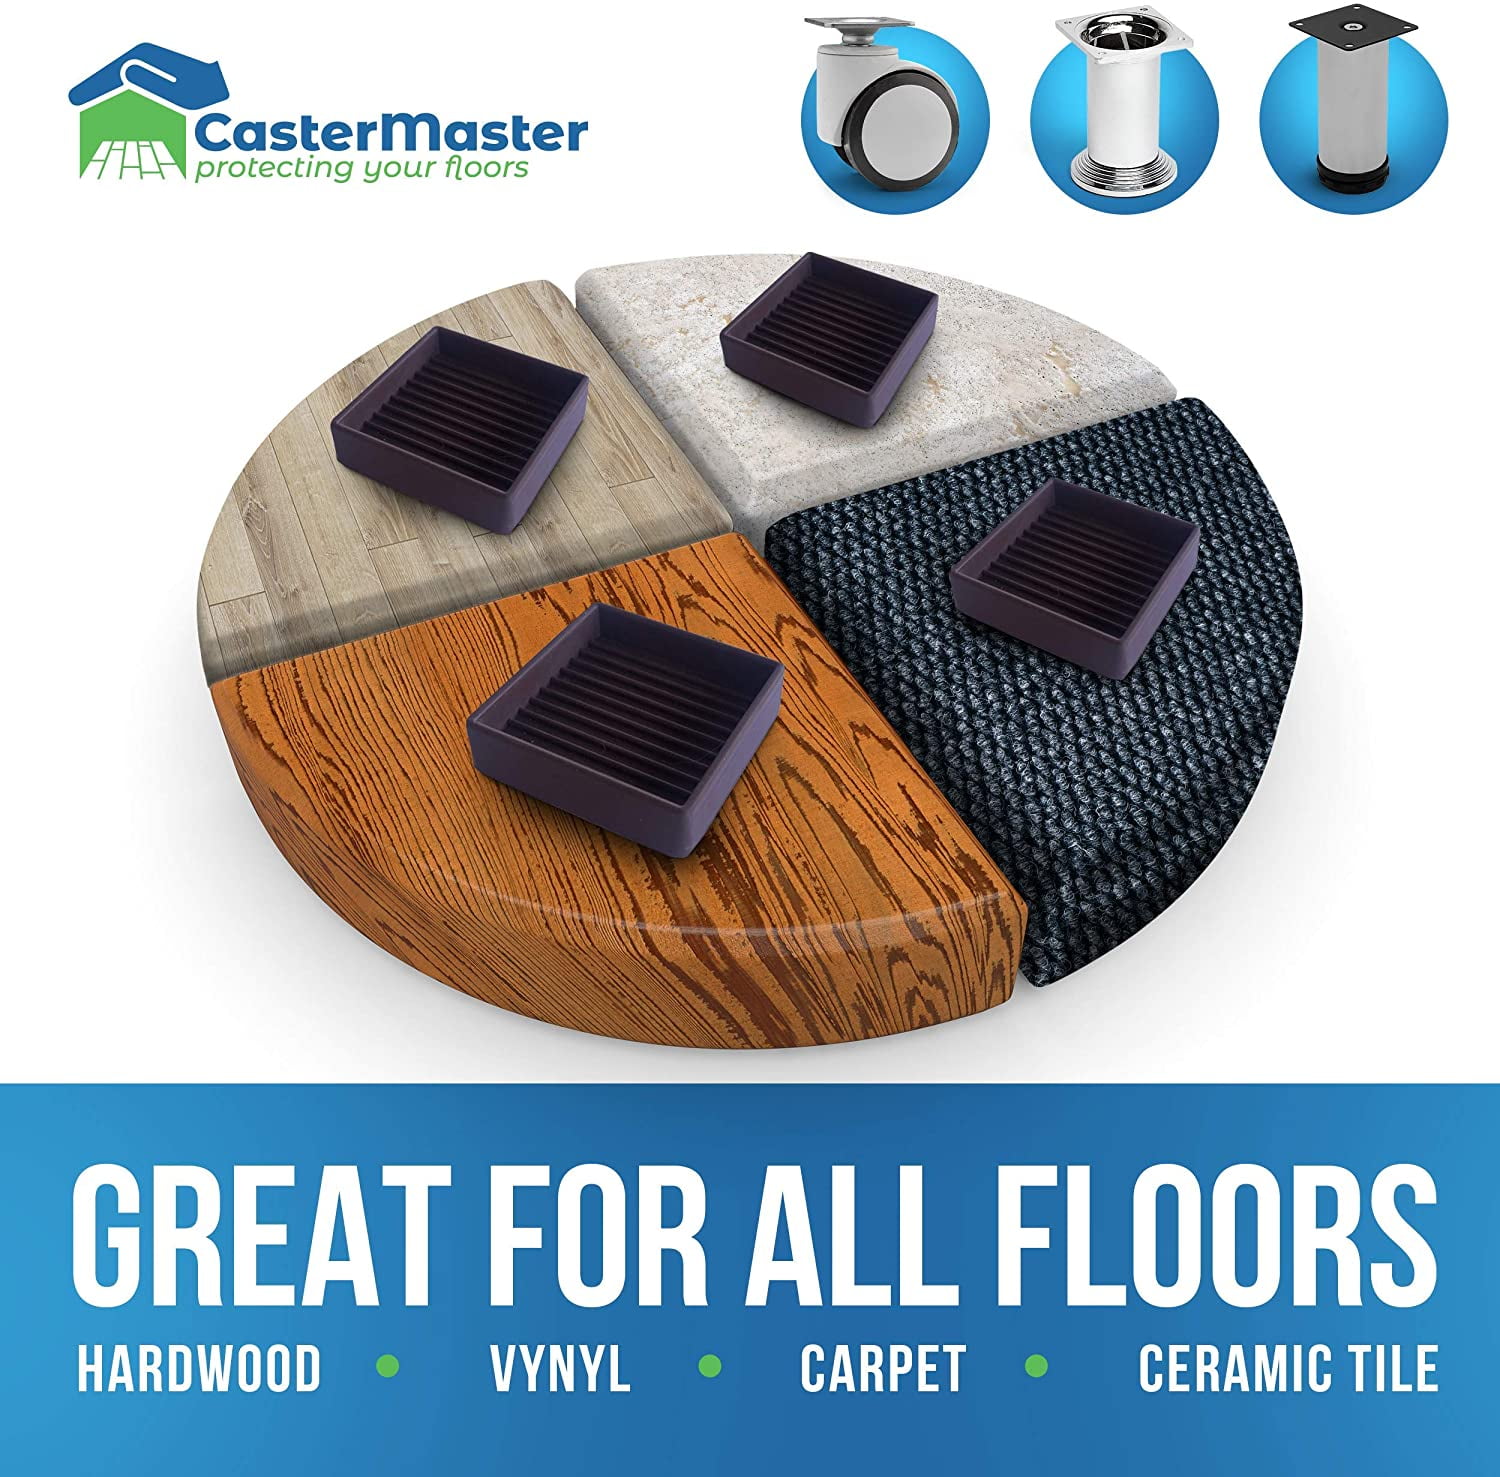  CasterMaster Non Slip Furniture Pads- 2x2 Square Rubber Anti  Skid Caster Cups, Leg Coasters- Couch, Chair, Feet, and Bed Stoppers-  Anti-Sliding Floor Protectors for Furniture (Set of 4) Black : Tools